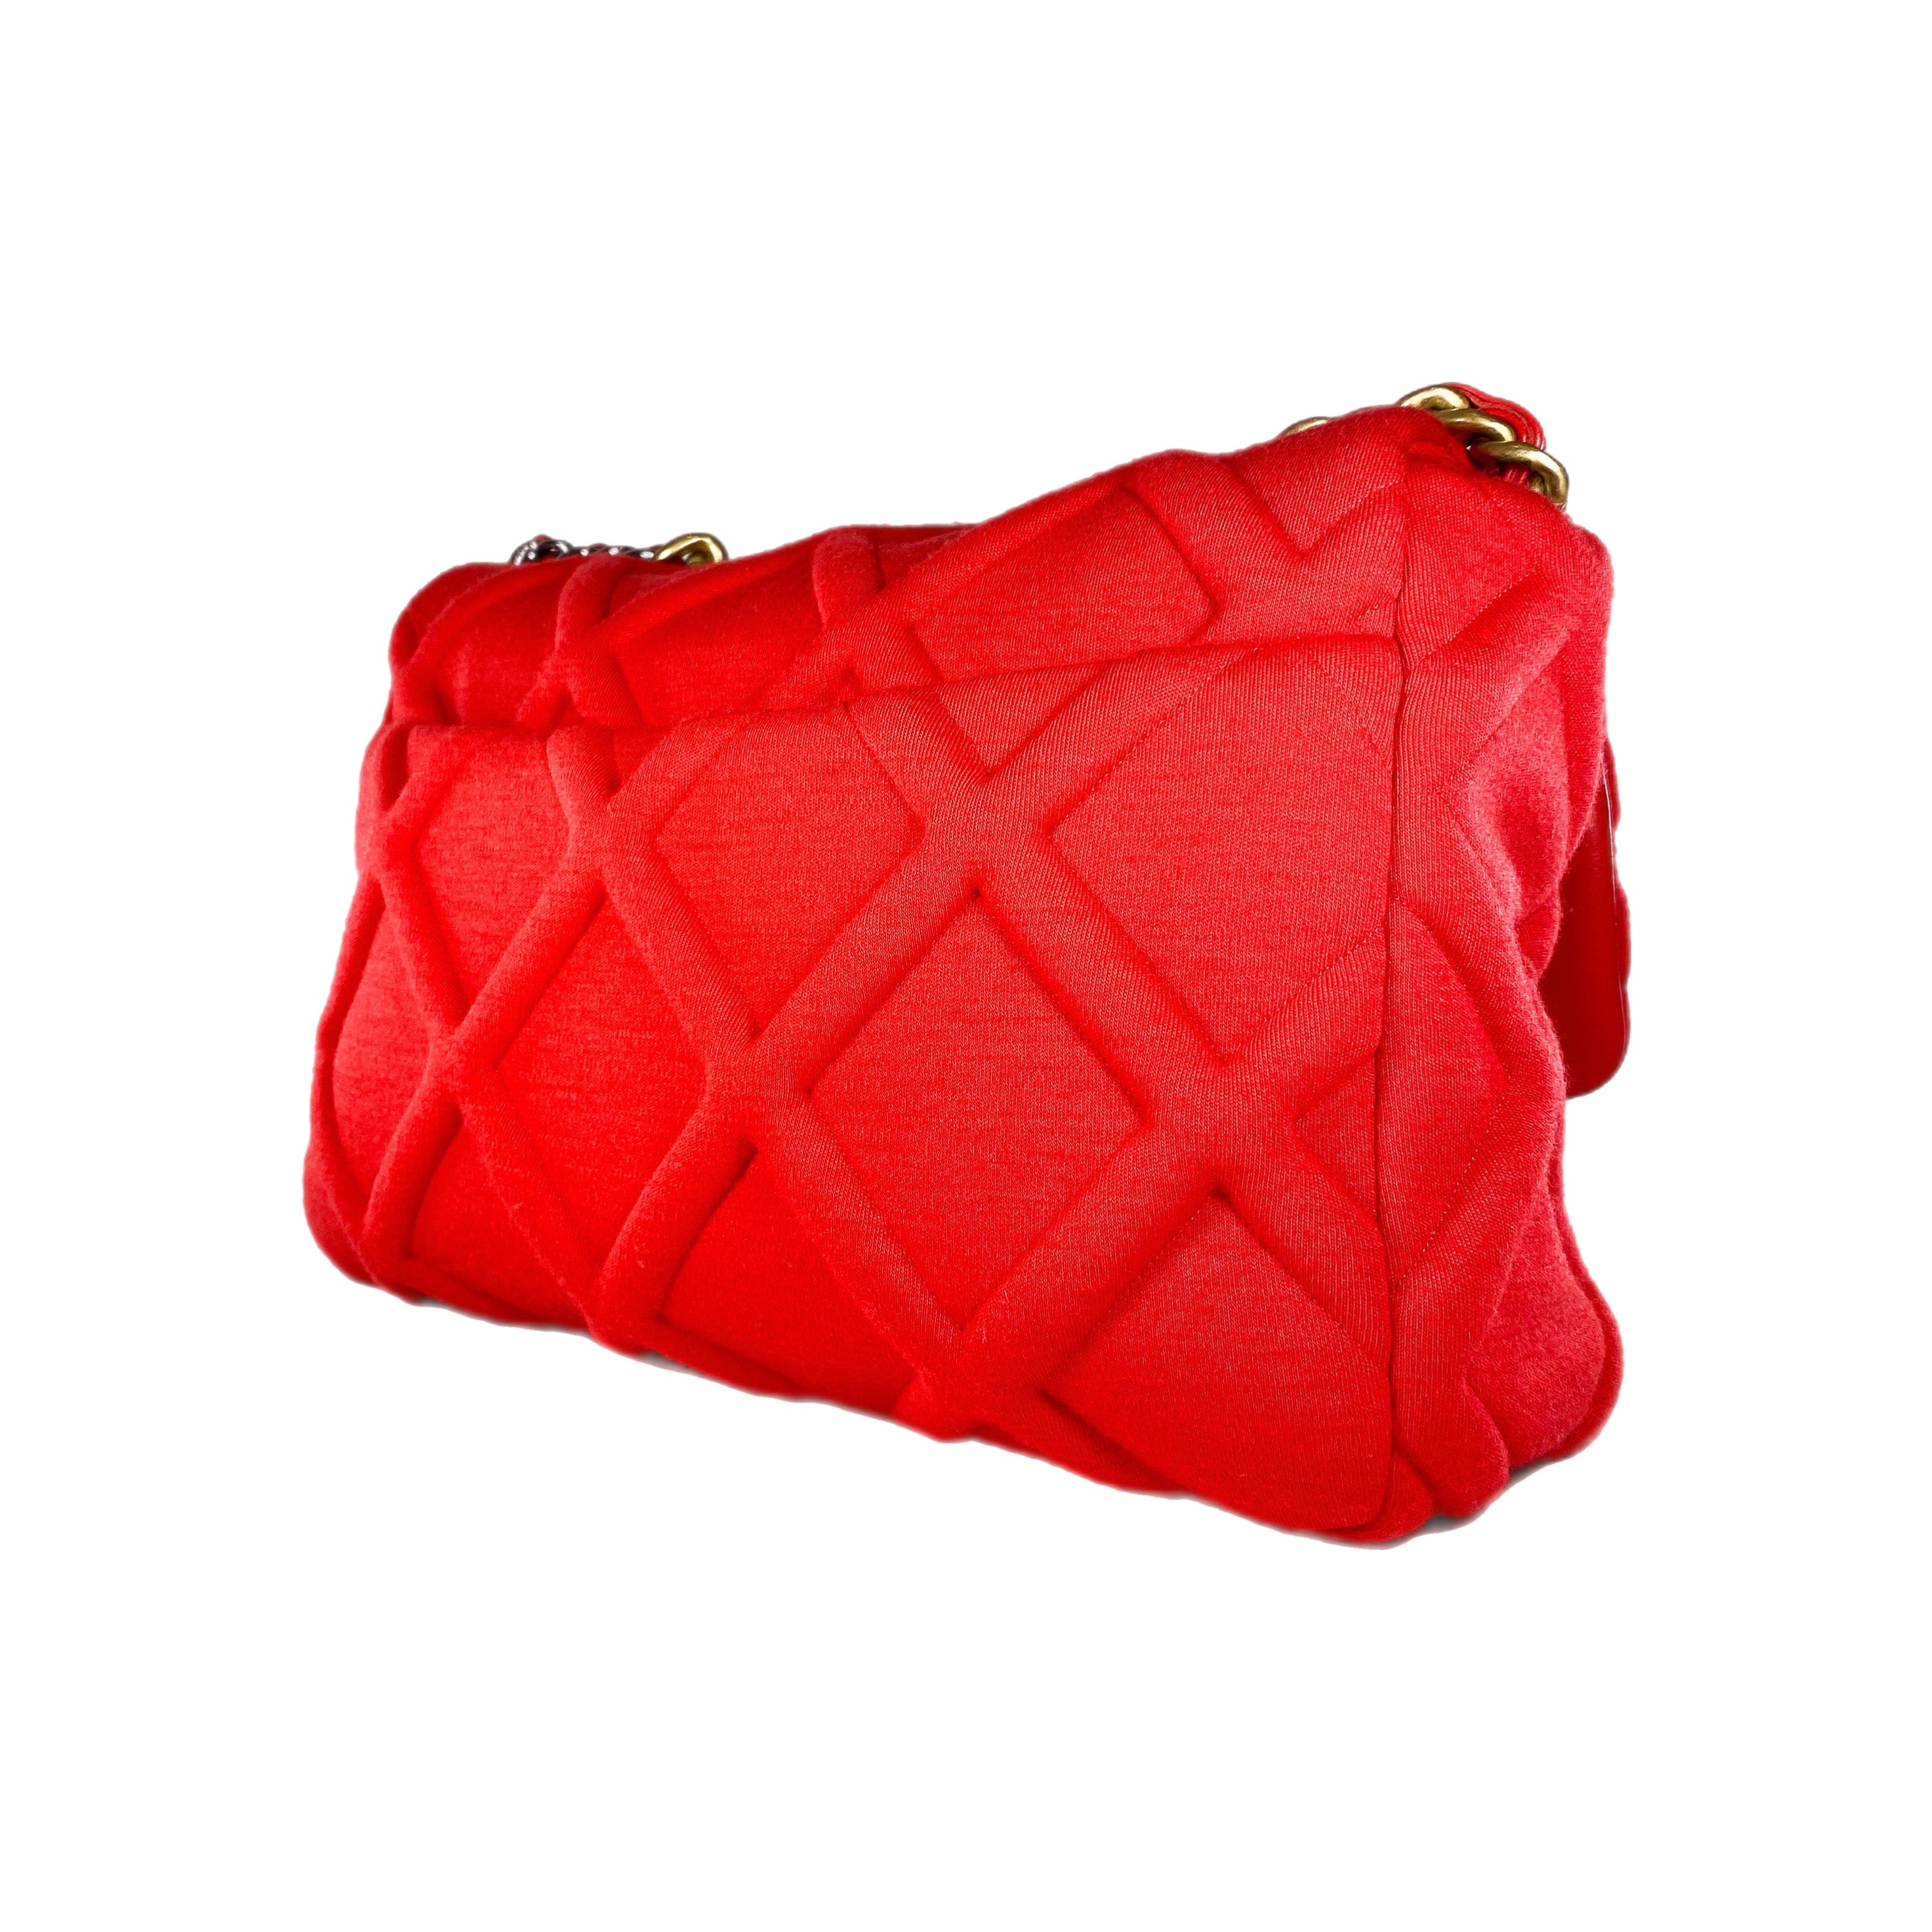 Chanel 19 Large Rouge Jersey Flap Bag